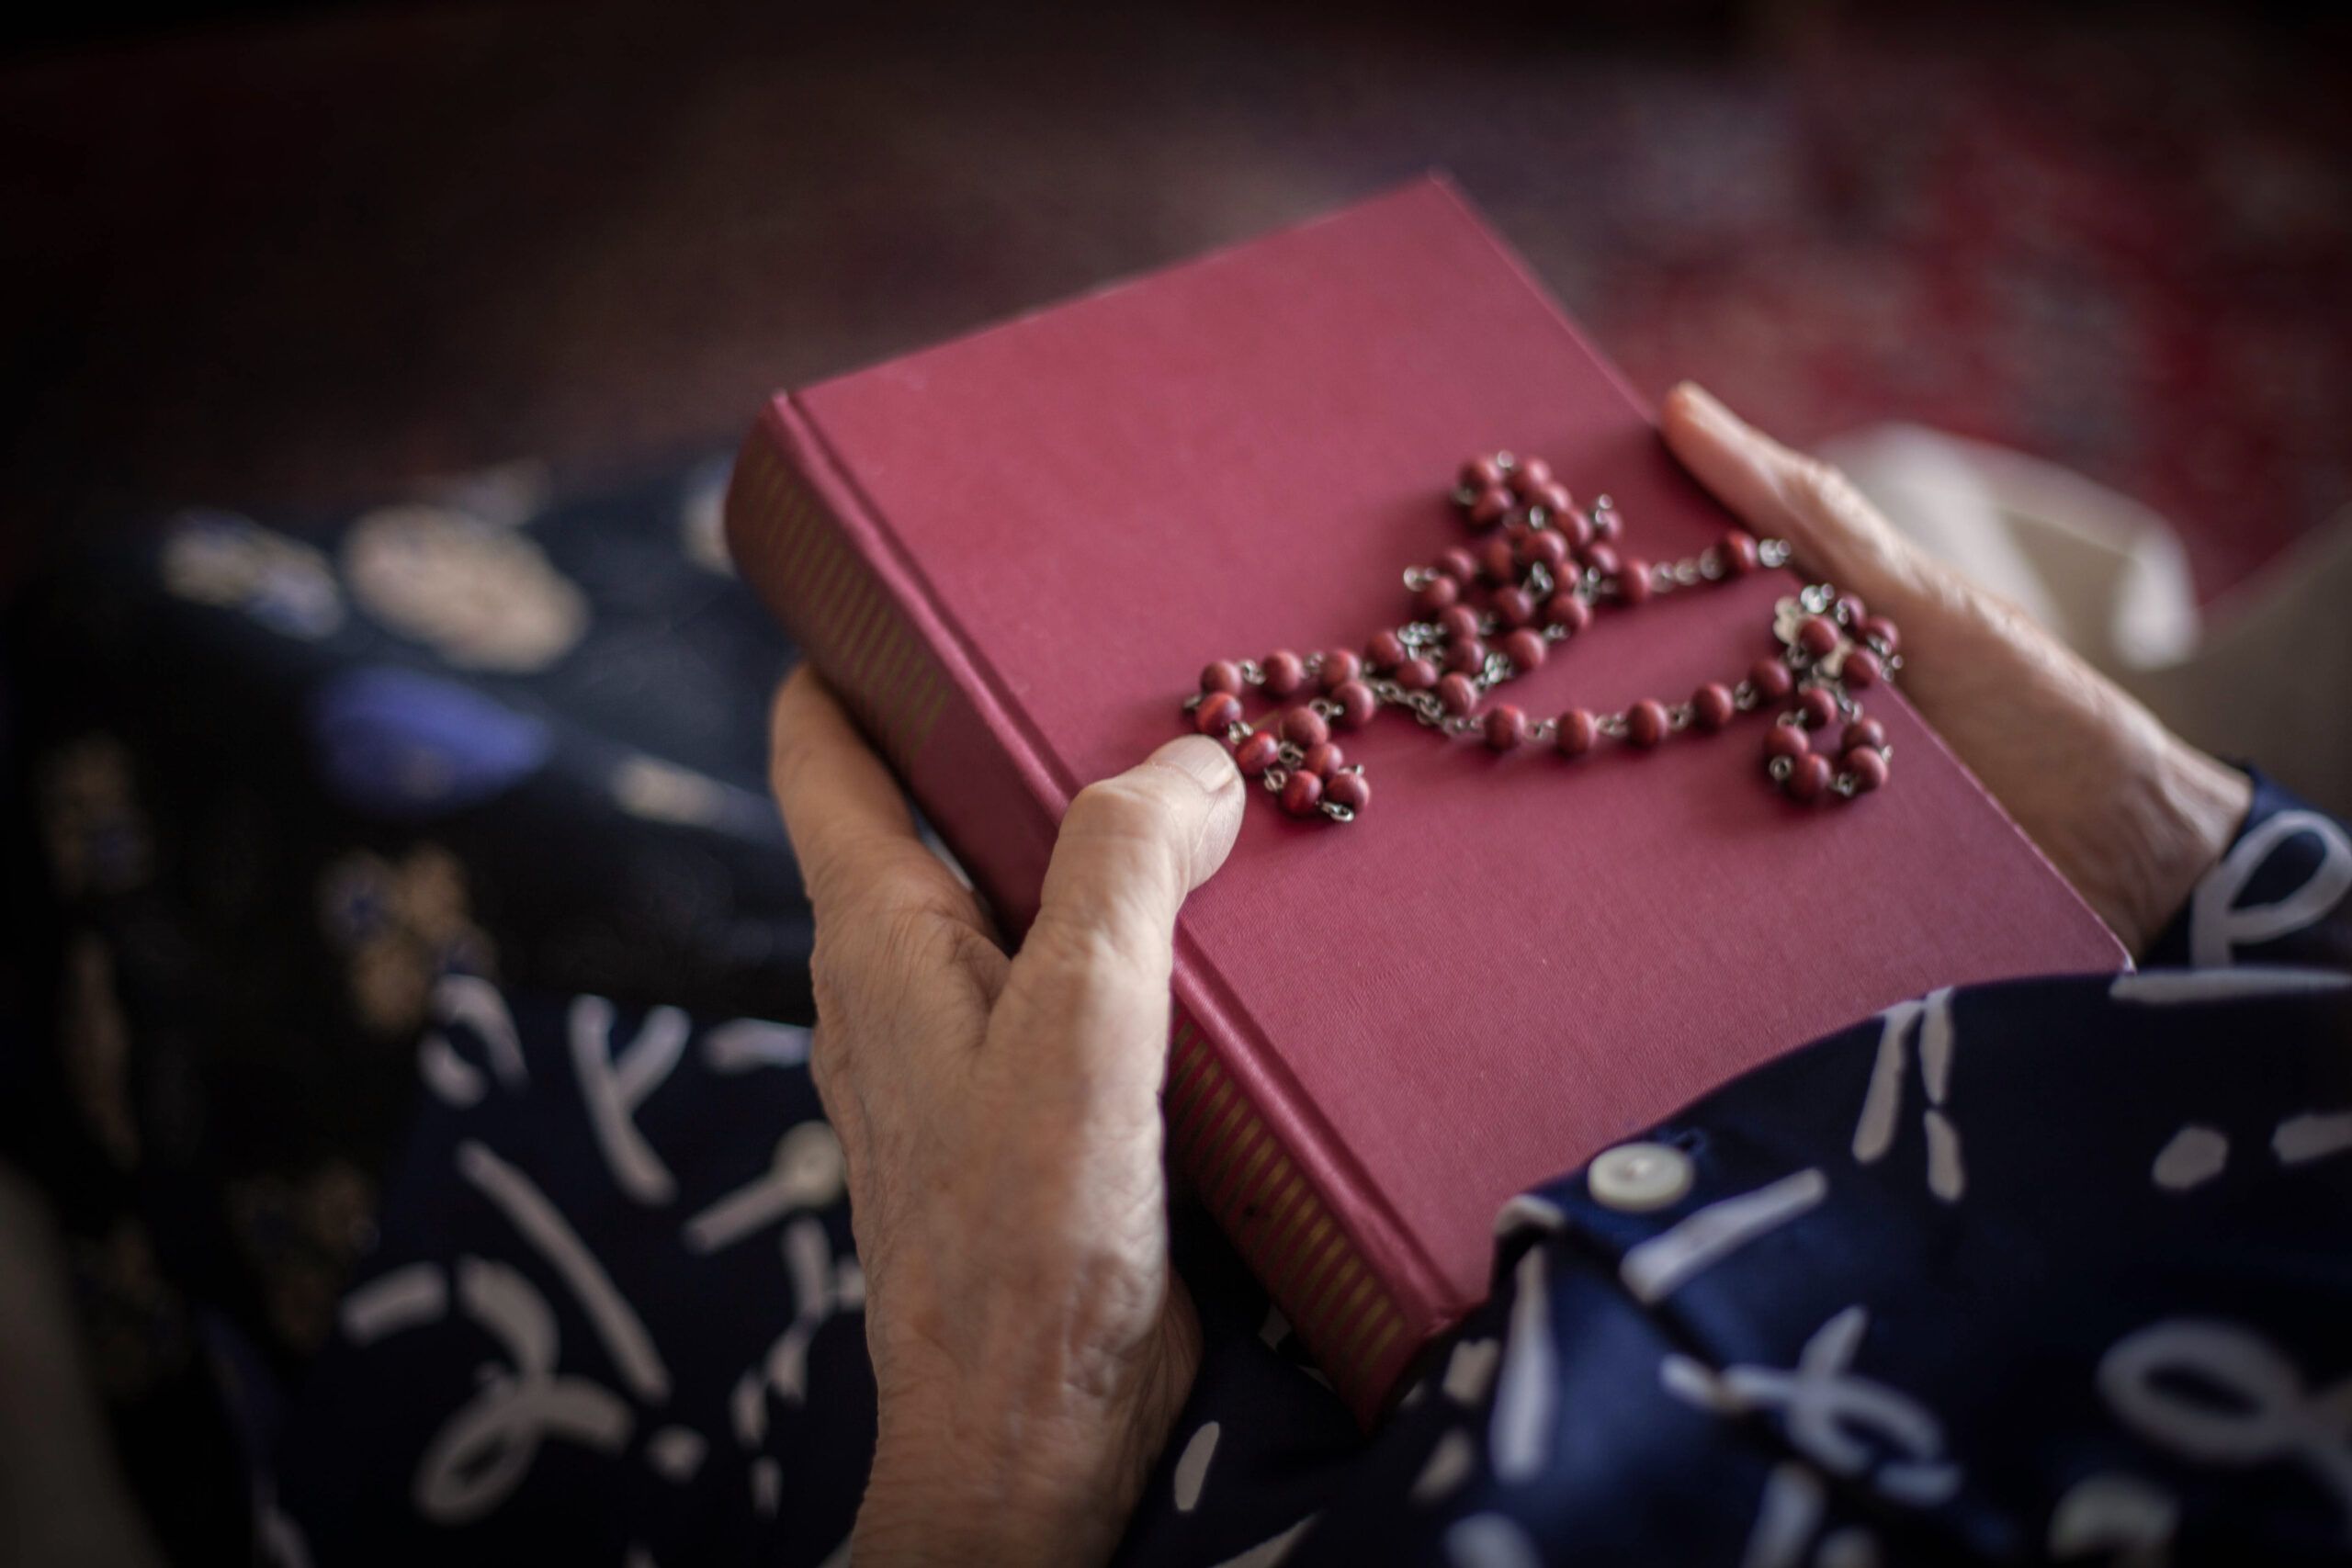 Hands clutching a bible and rosary